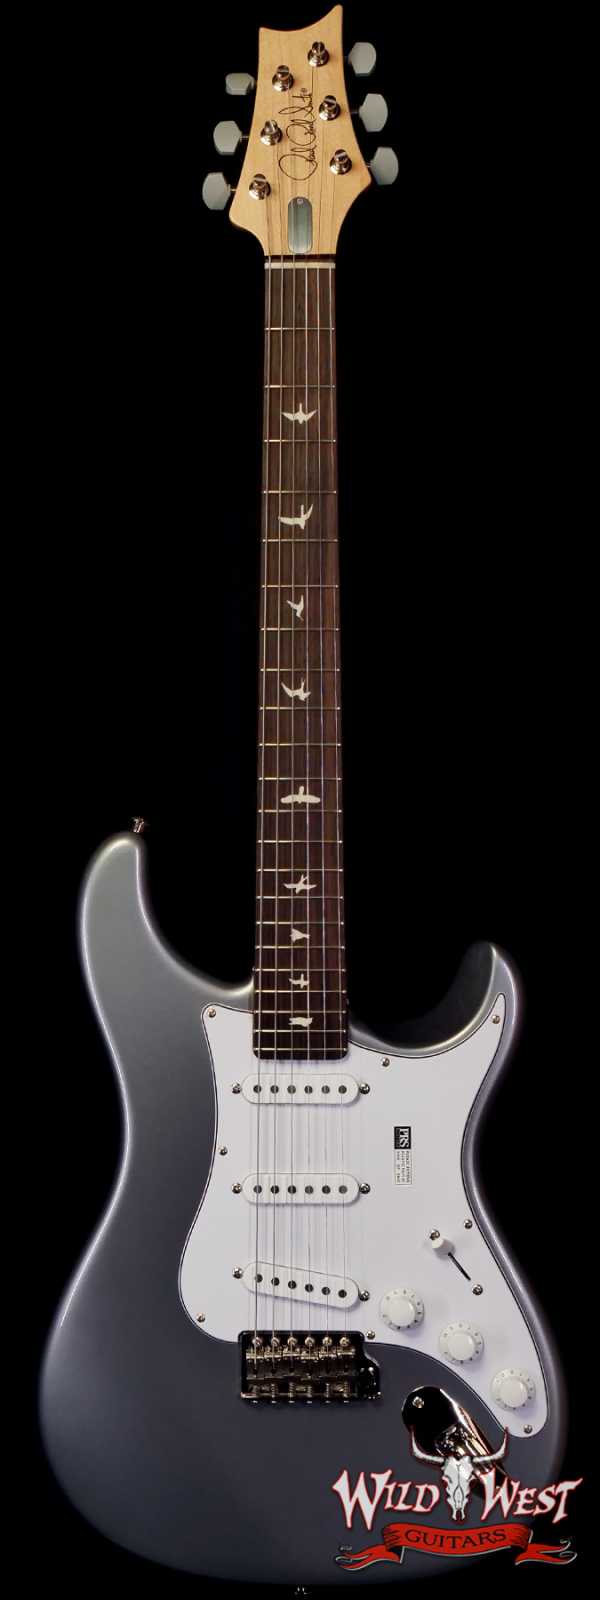 Paul Reed Smith PRS John Mayer Signature Model Silver Sky Rosewood Fingerboard Tungsten 7.20 LBS